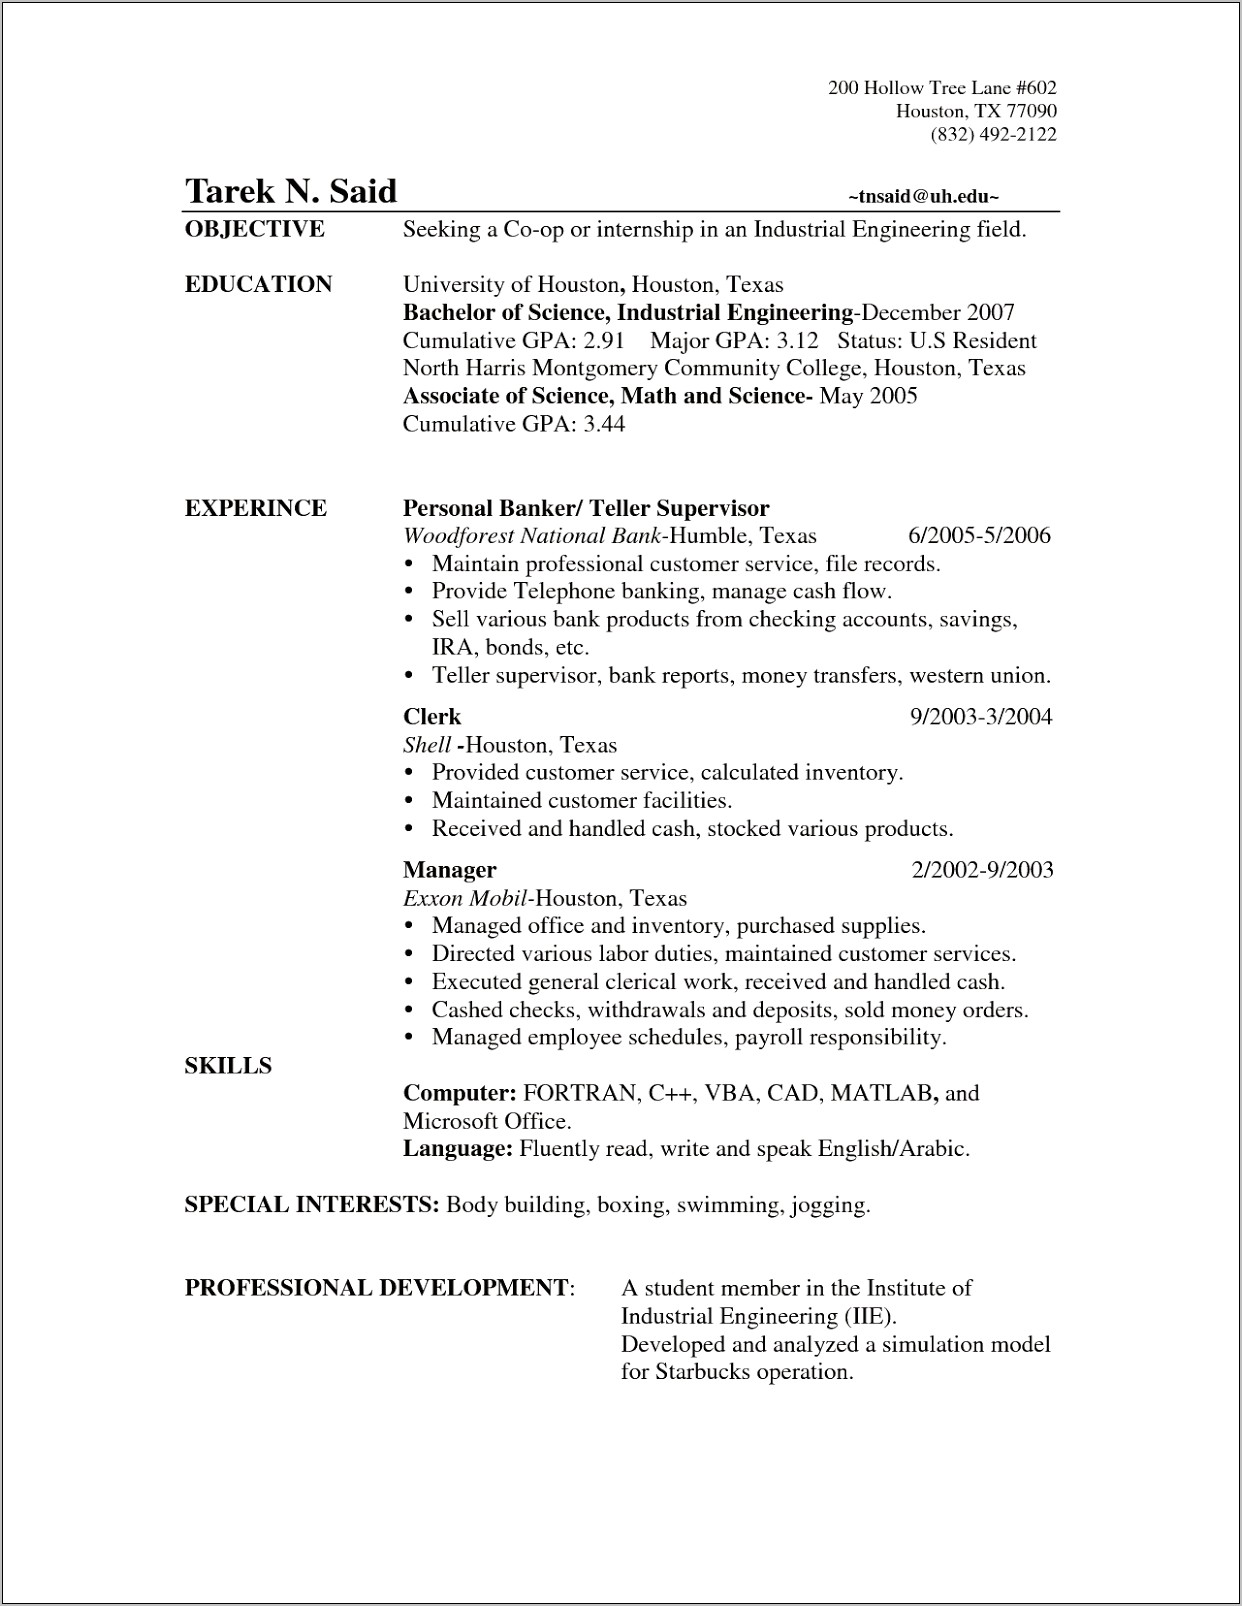 Resume Of A Bank Teller Template